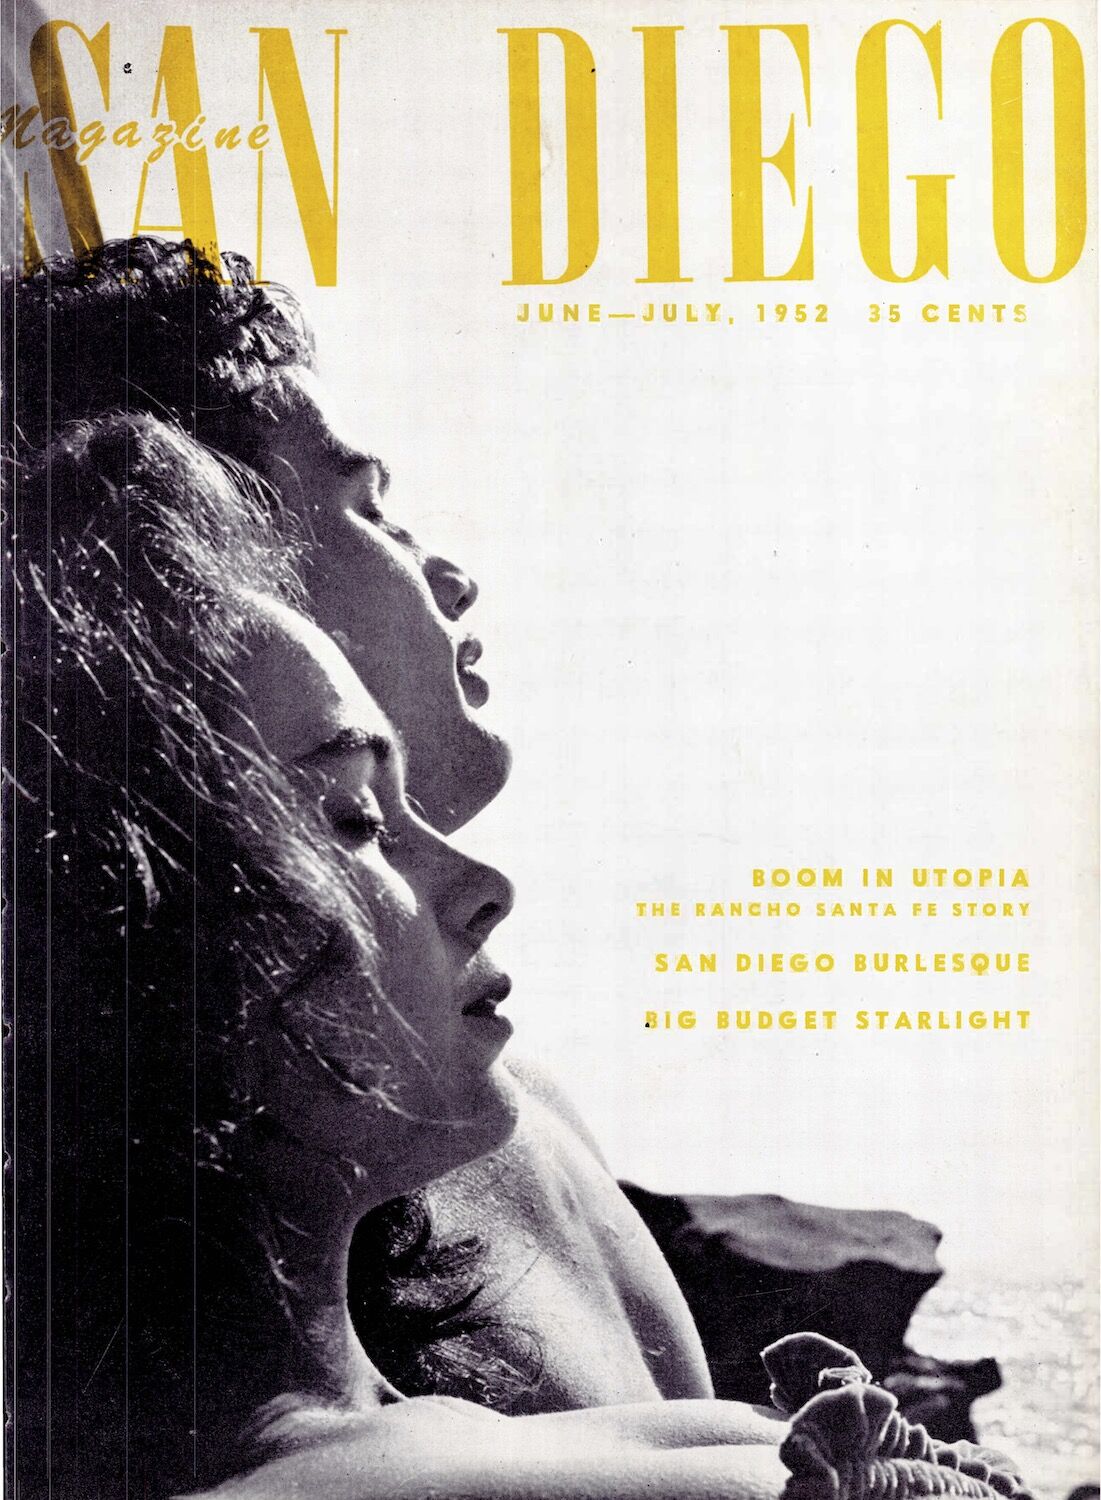 June-July 1952 San Diego Magazine Cover